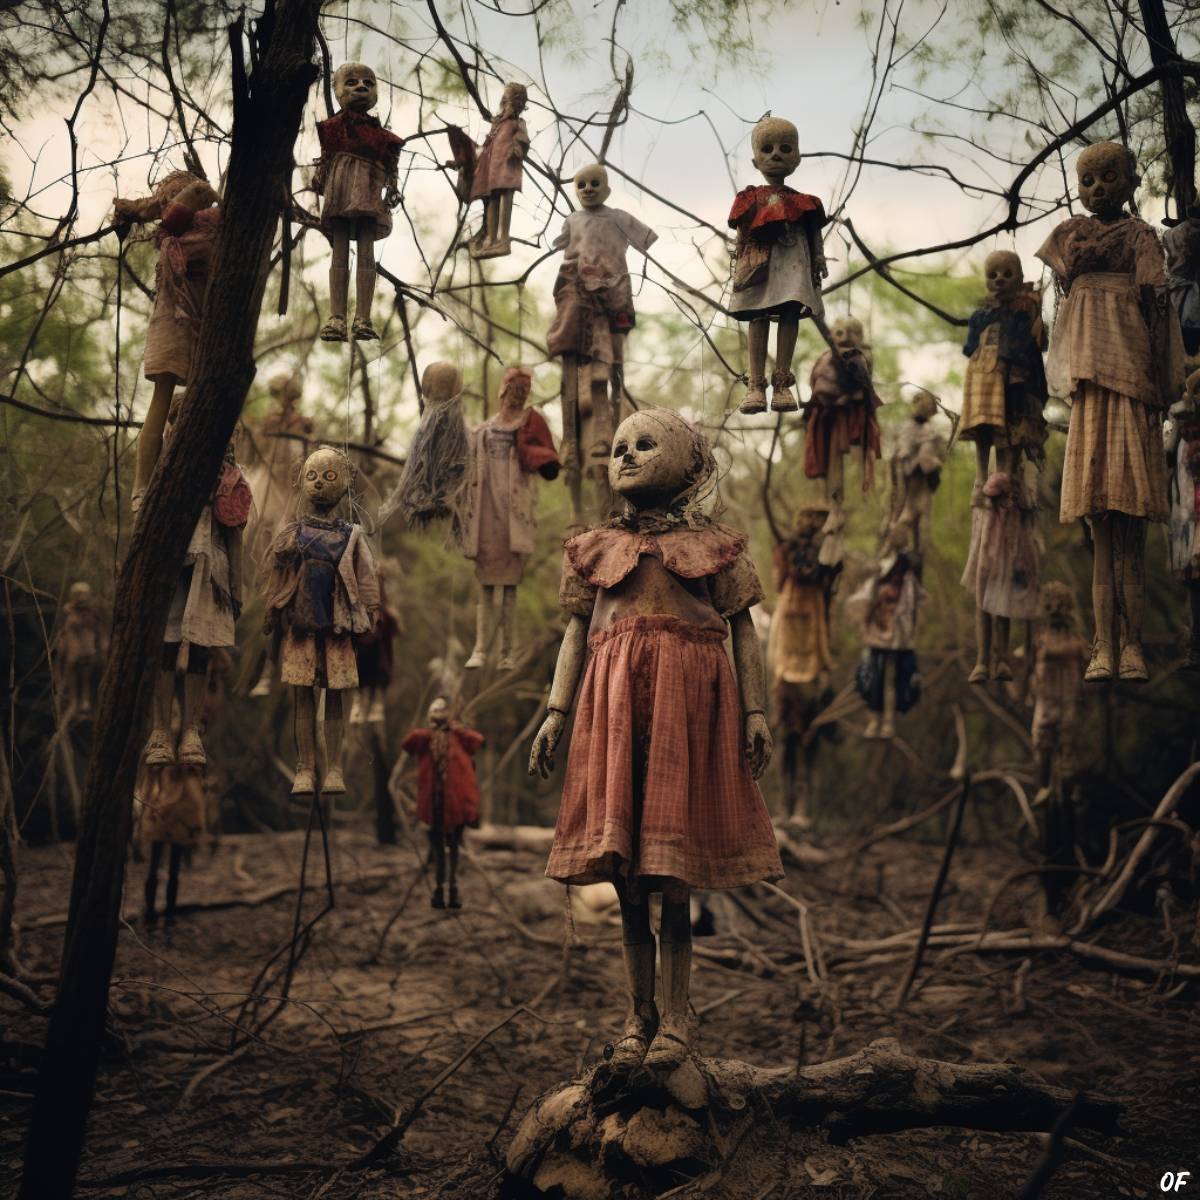 Island of the Dead Dolls.